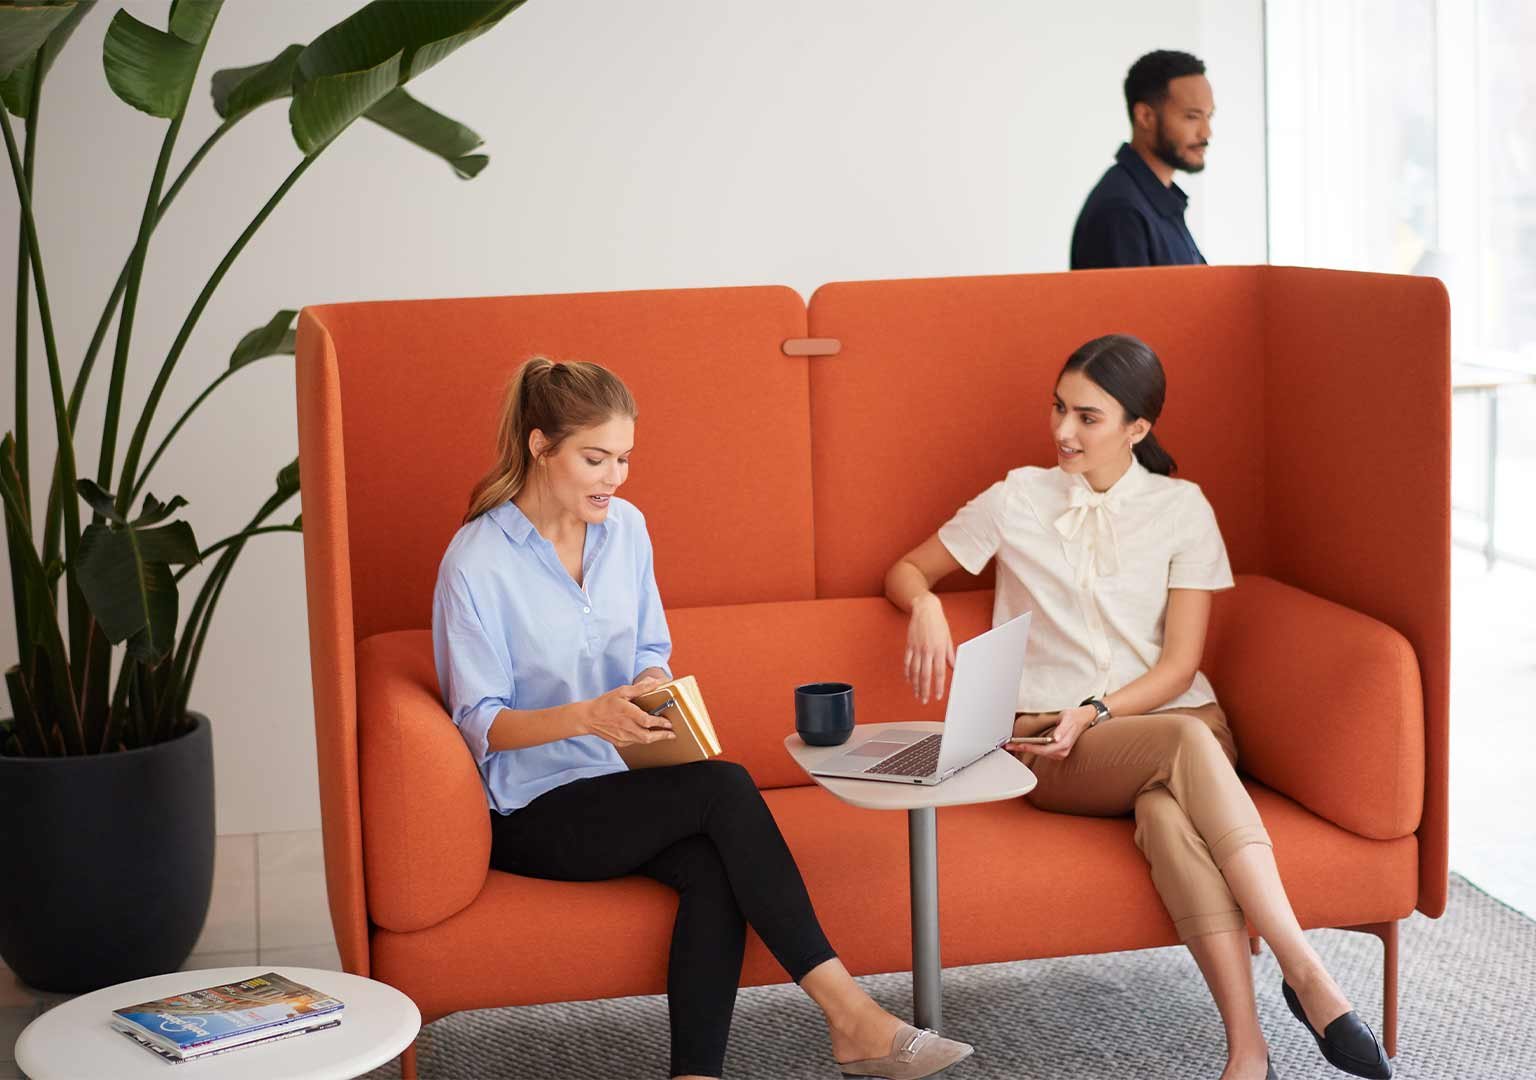 employee experience drives innovation in workplace design